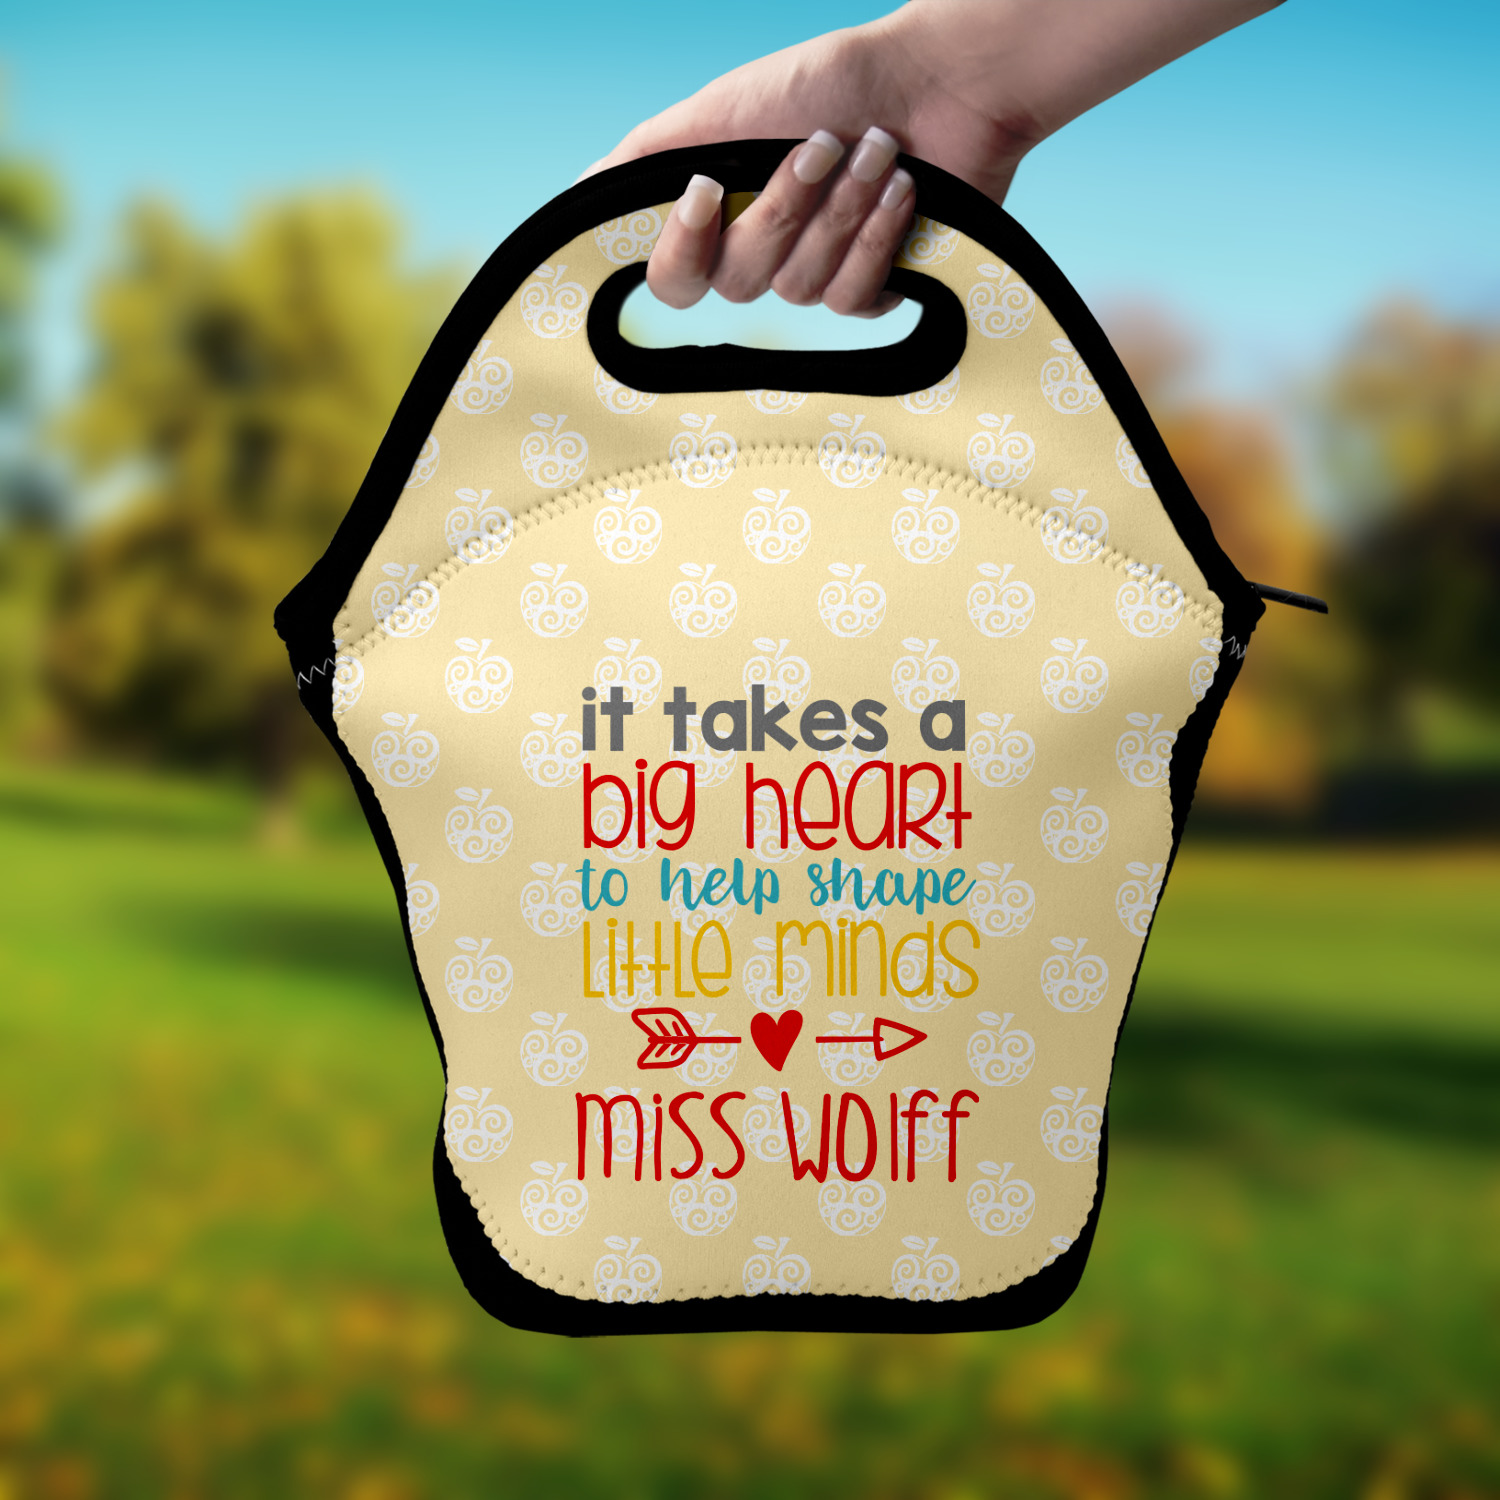 https://www.youcustomizeit.com/common/MAKE/1038343/Teacher-Quotes-and-Sayings-Lunch-Bag-Hand.jpg?lm=1566251258